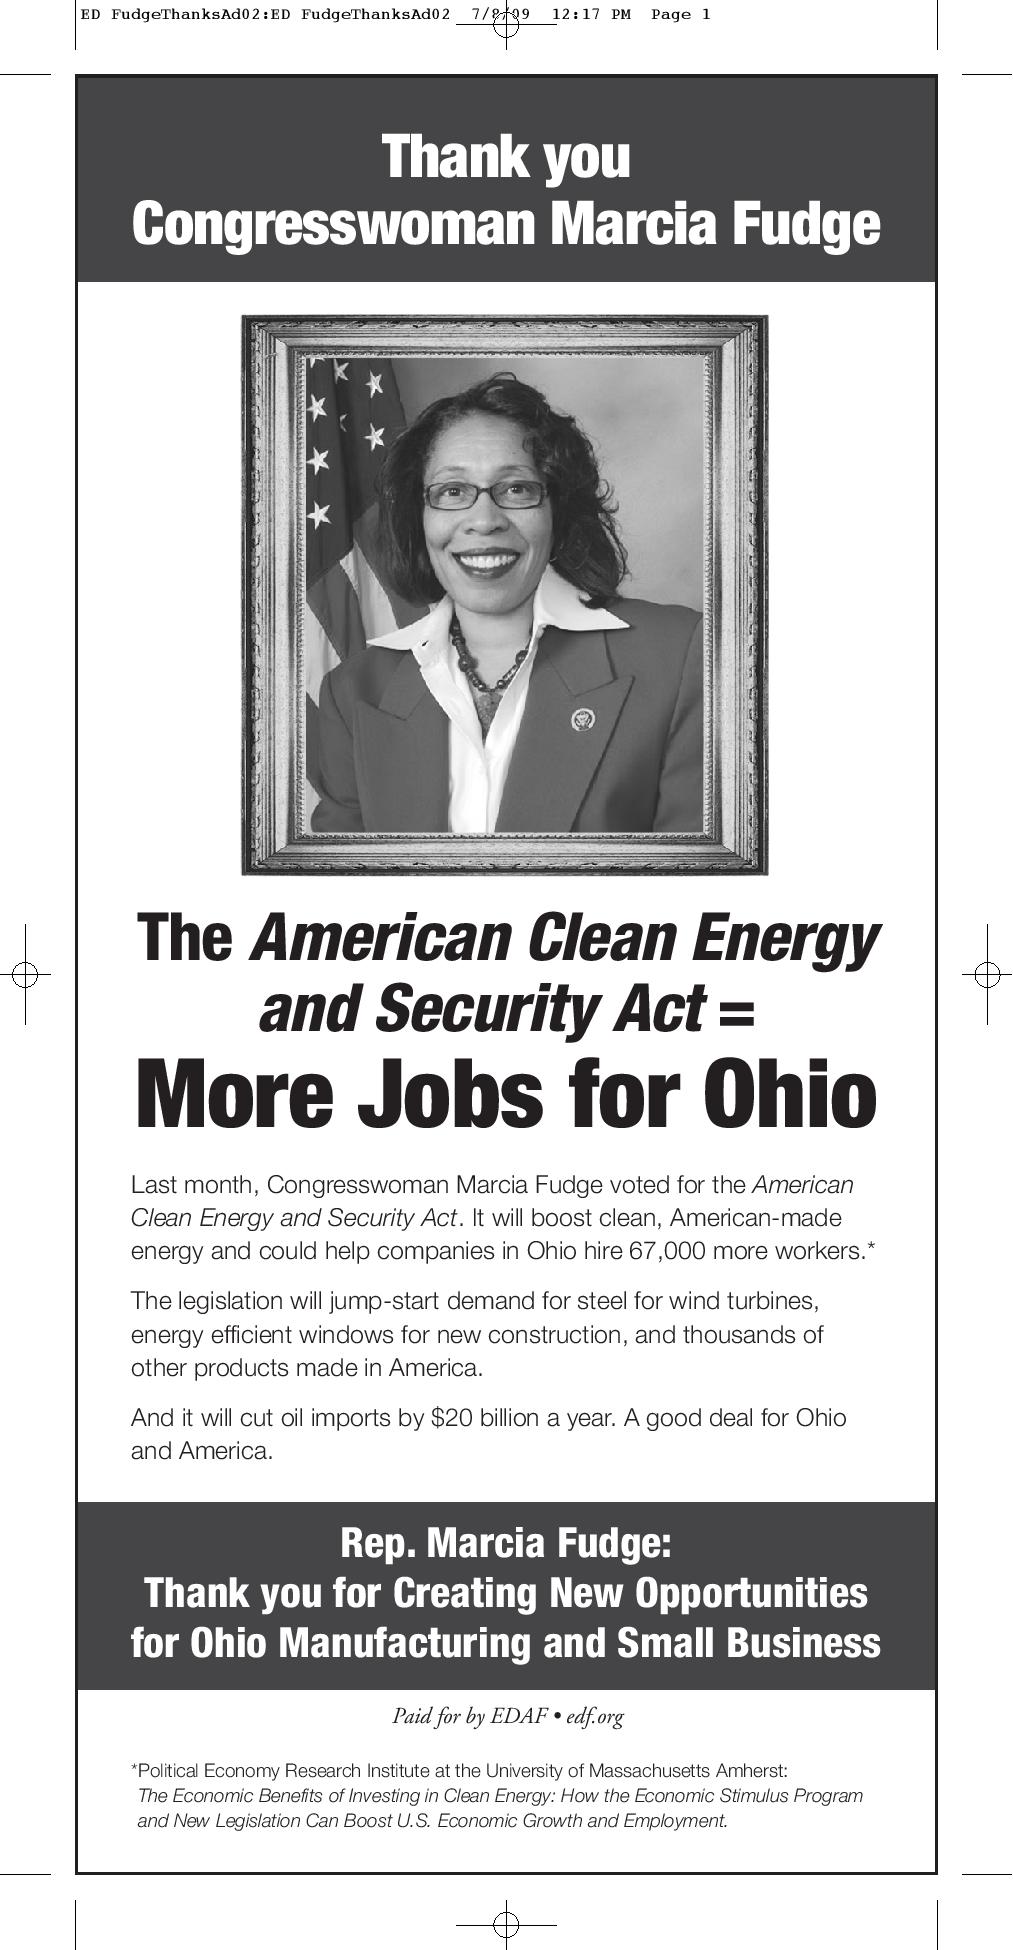 Thank You for Supporting the American Clean Energy and Security Act: Rep. Marcia Fudge